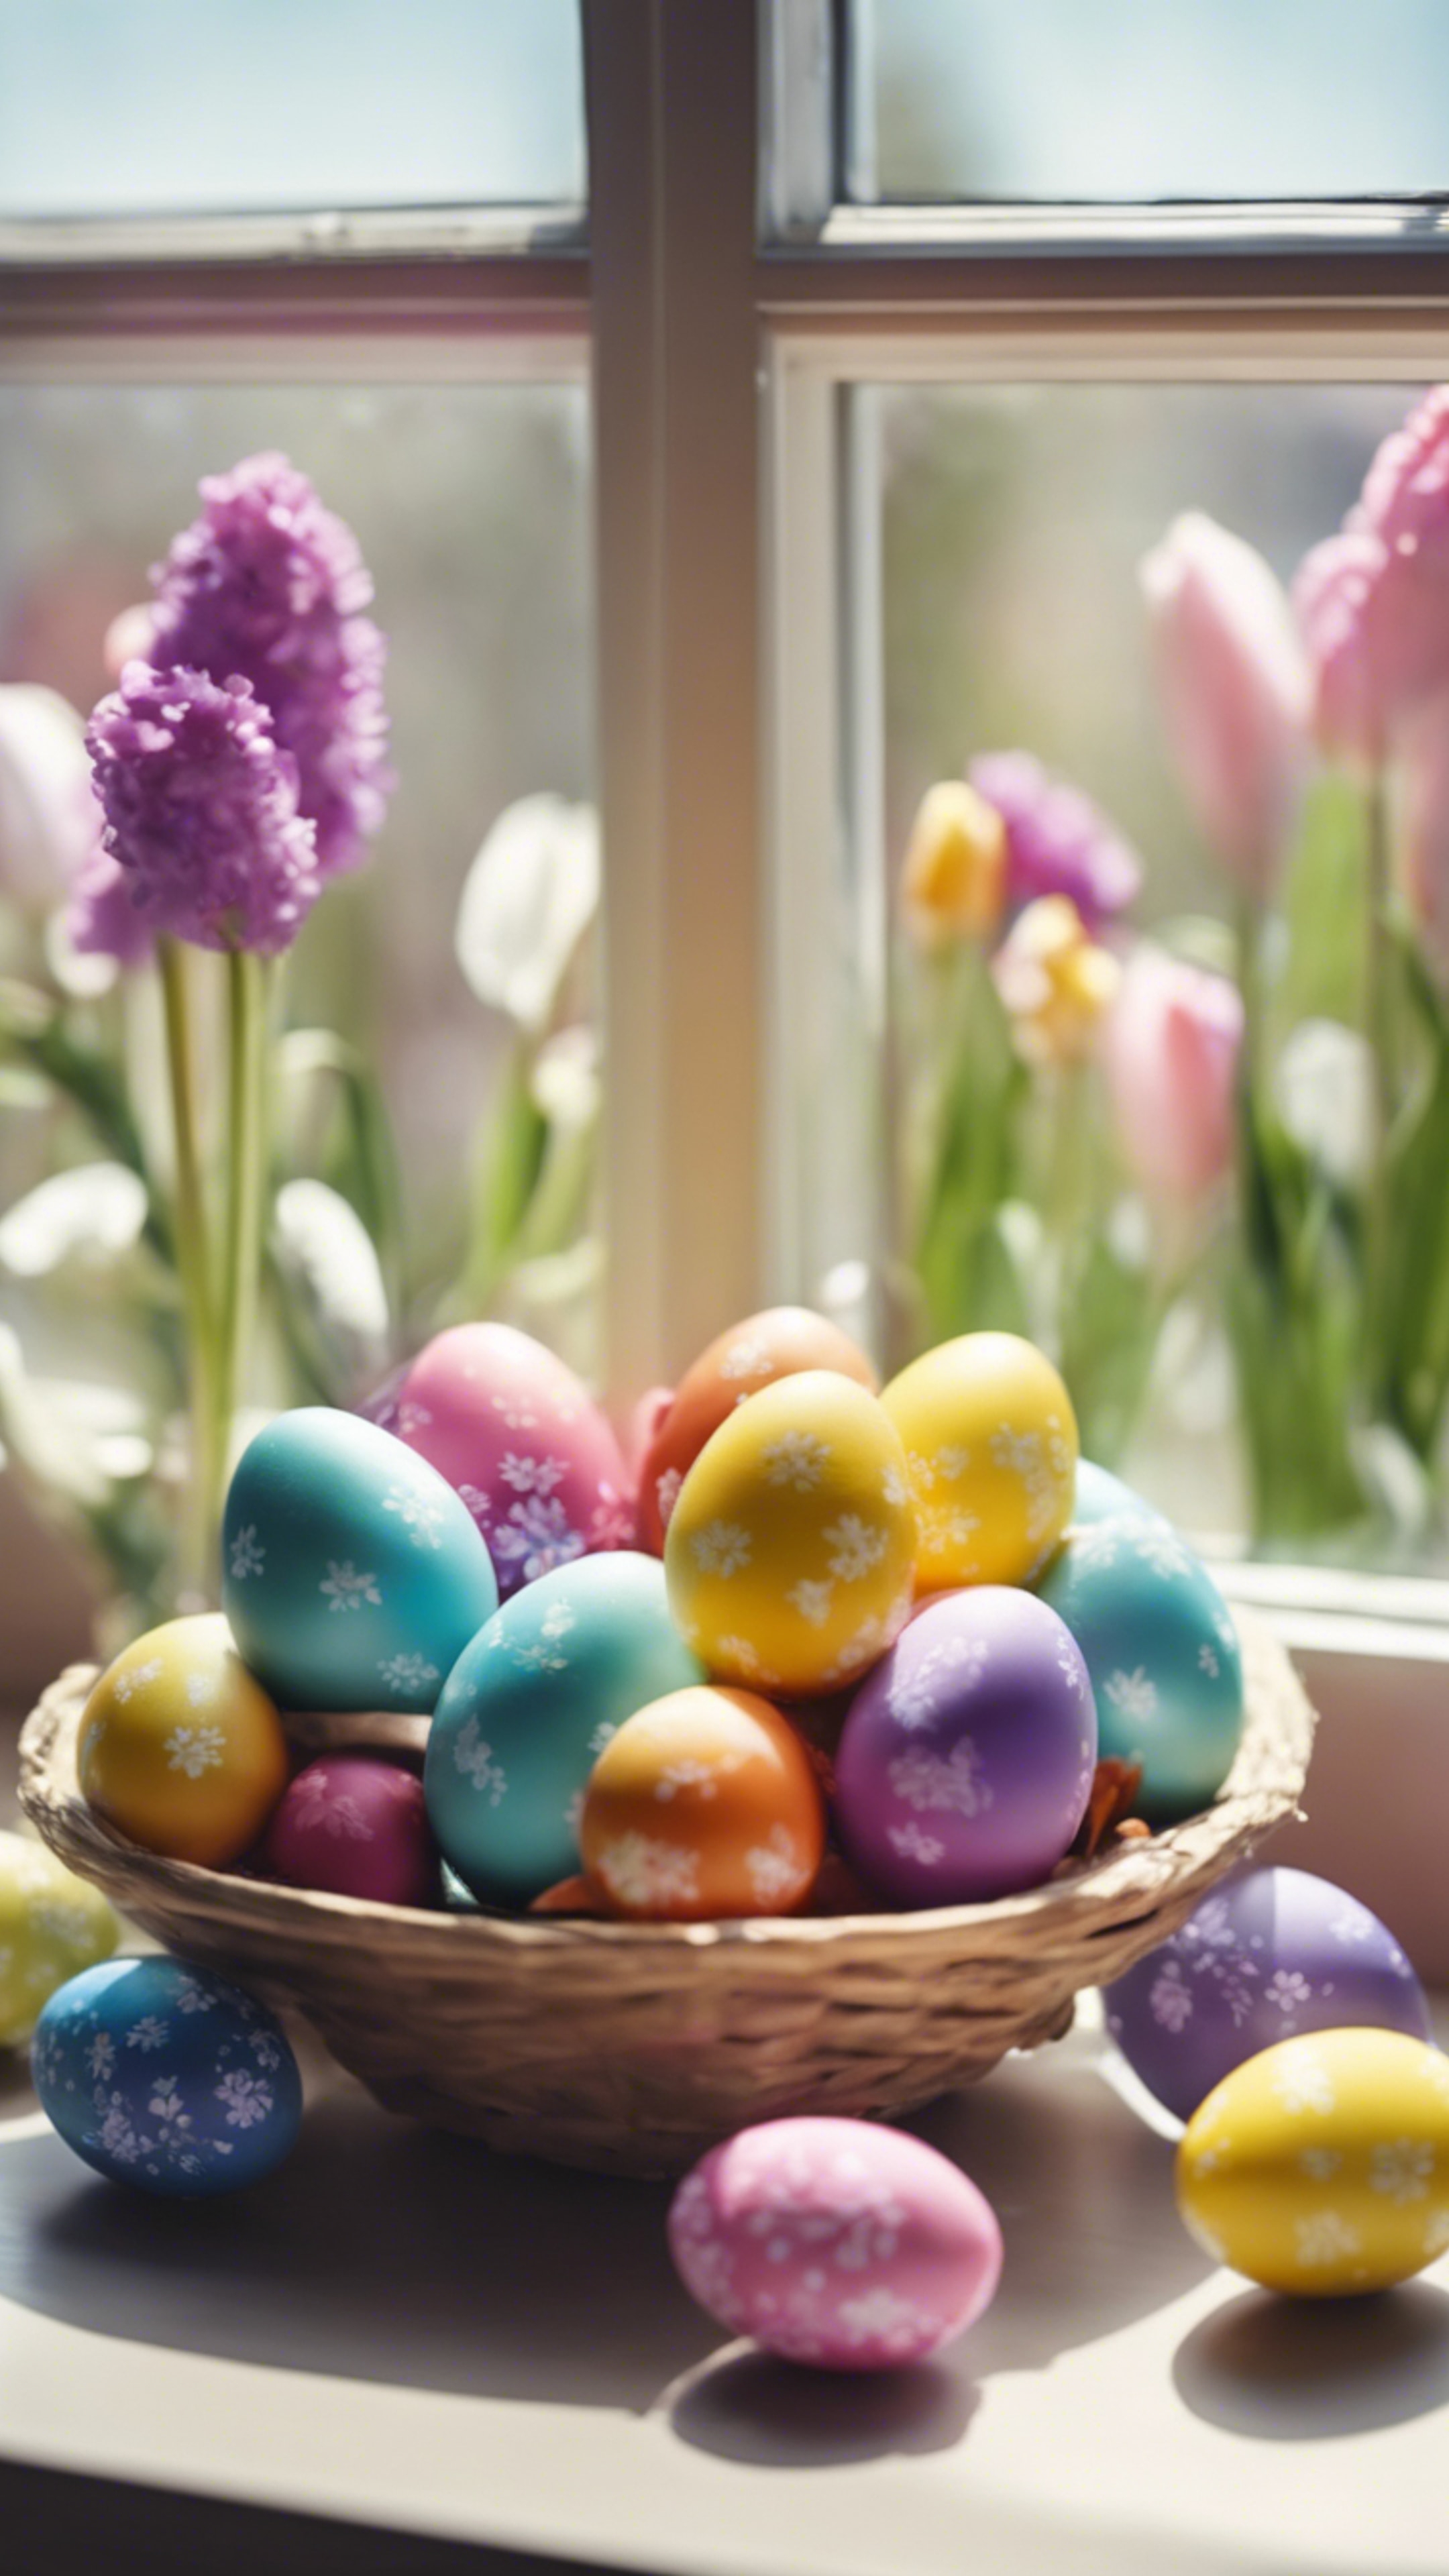 Rainbow Easter eggs displayed on a sunny windowsill among fragrant spring flowers. Kertas dinding[d79aa761c1b244c3af52]